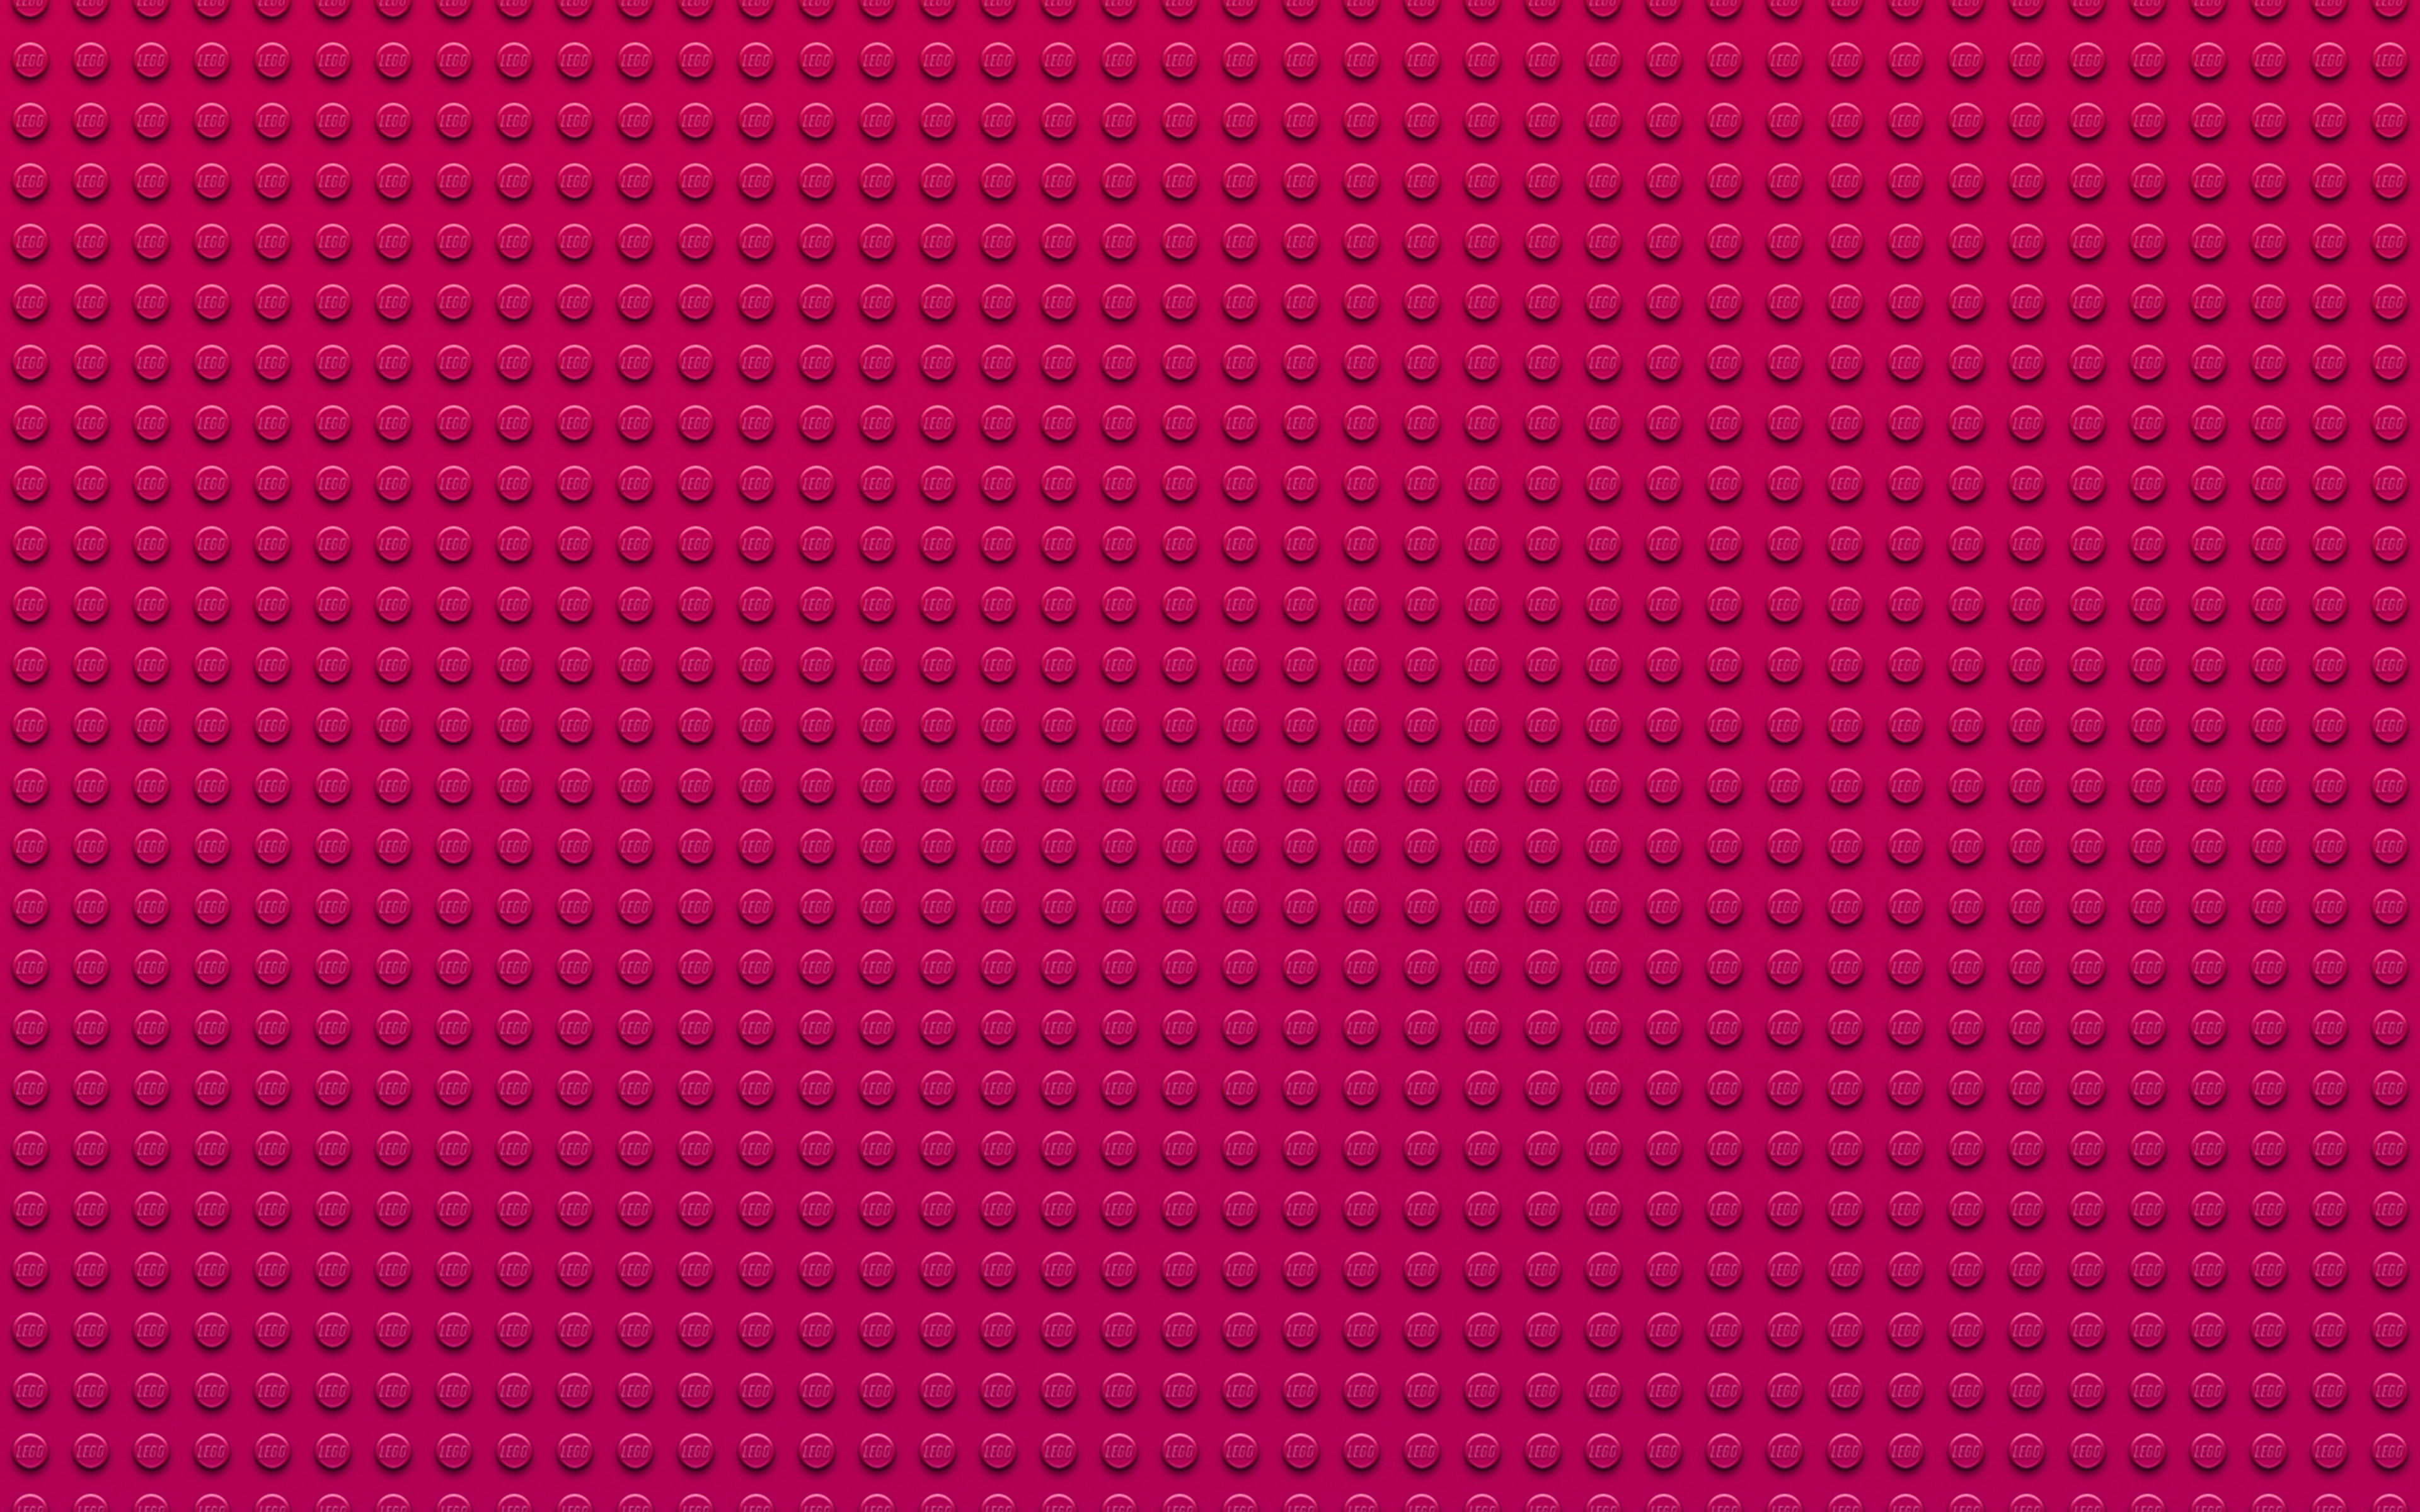 lego, toy, red, block, pattern